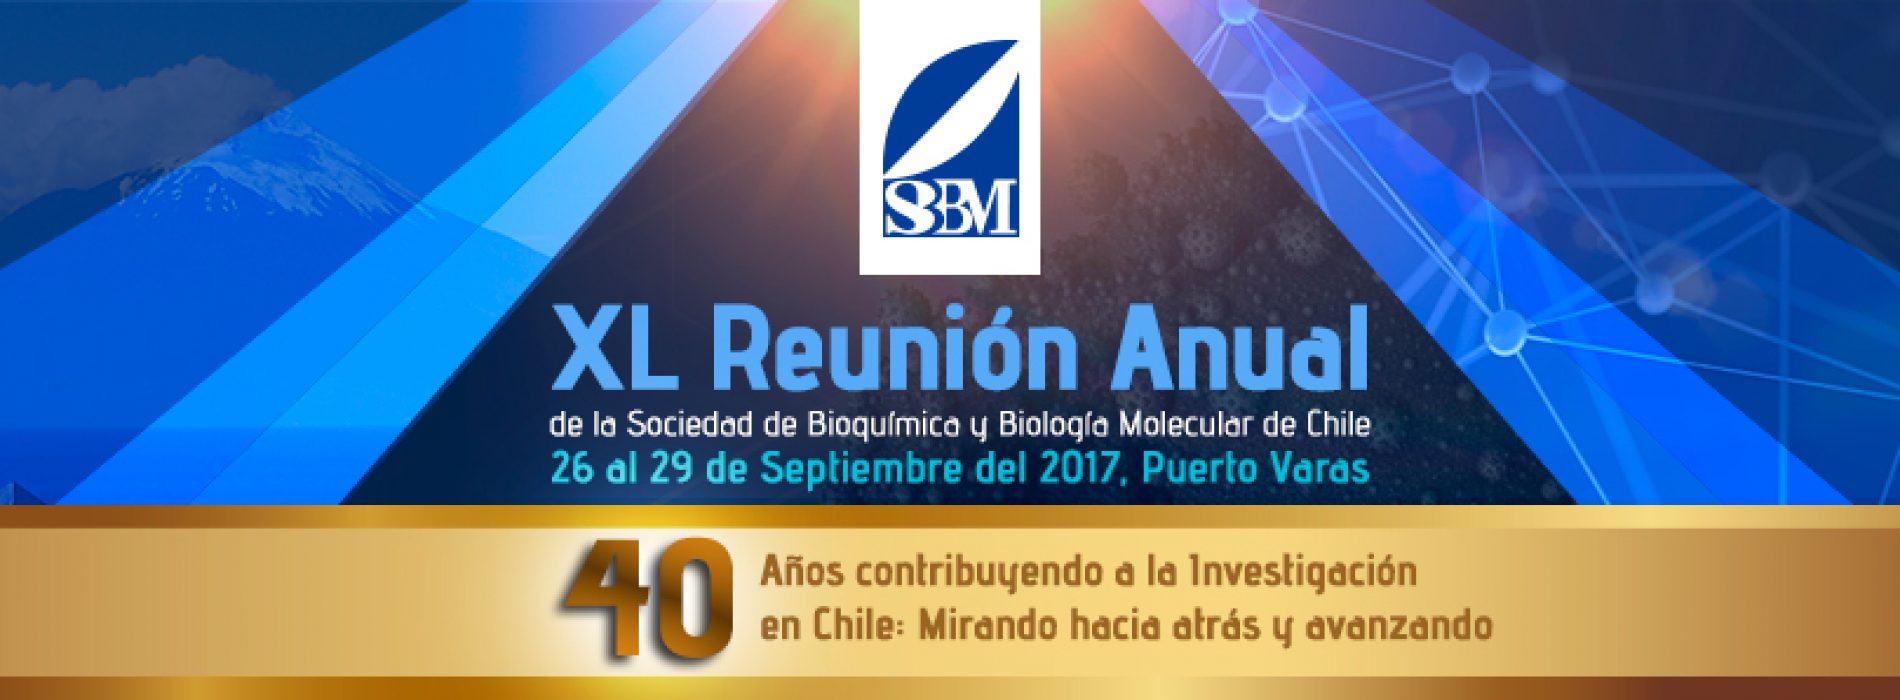 Audiovisual recording of the Congress of the society for Biochemistry and Molecular Biology of Chile 2017